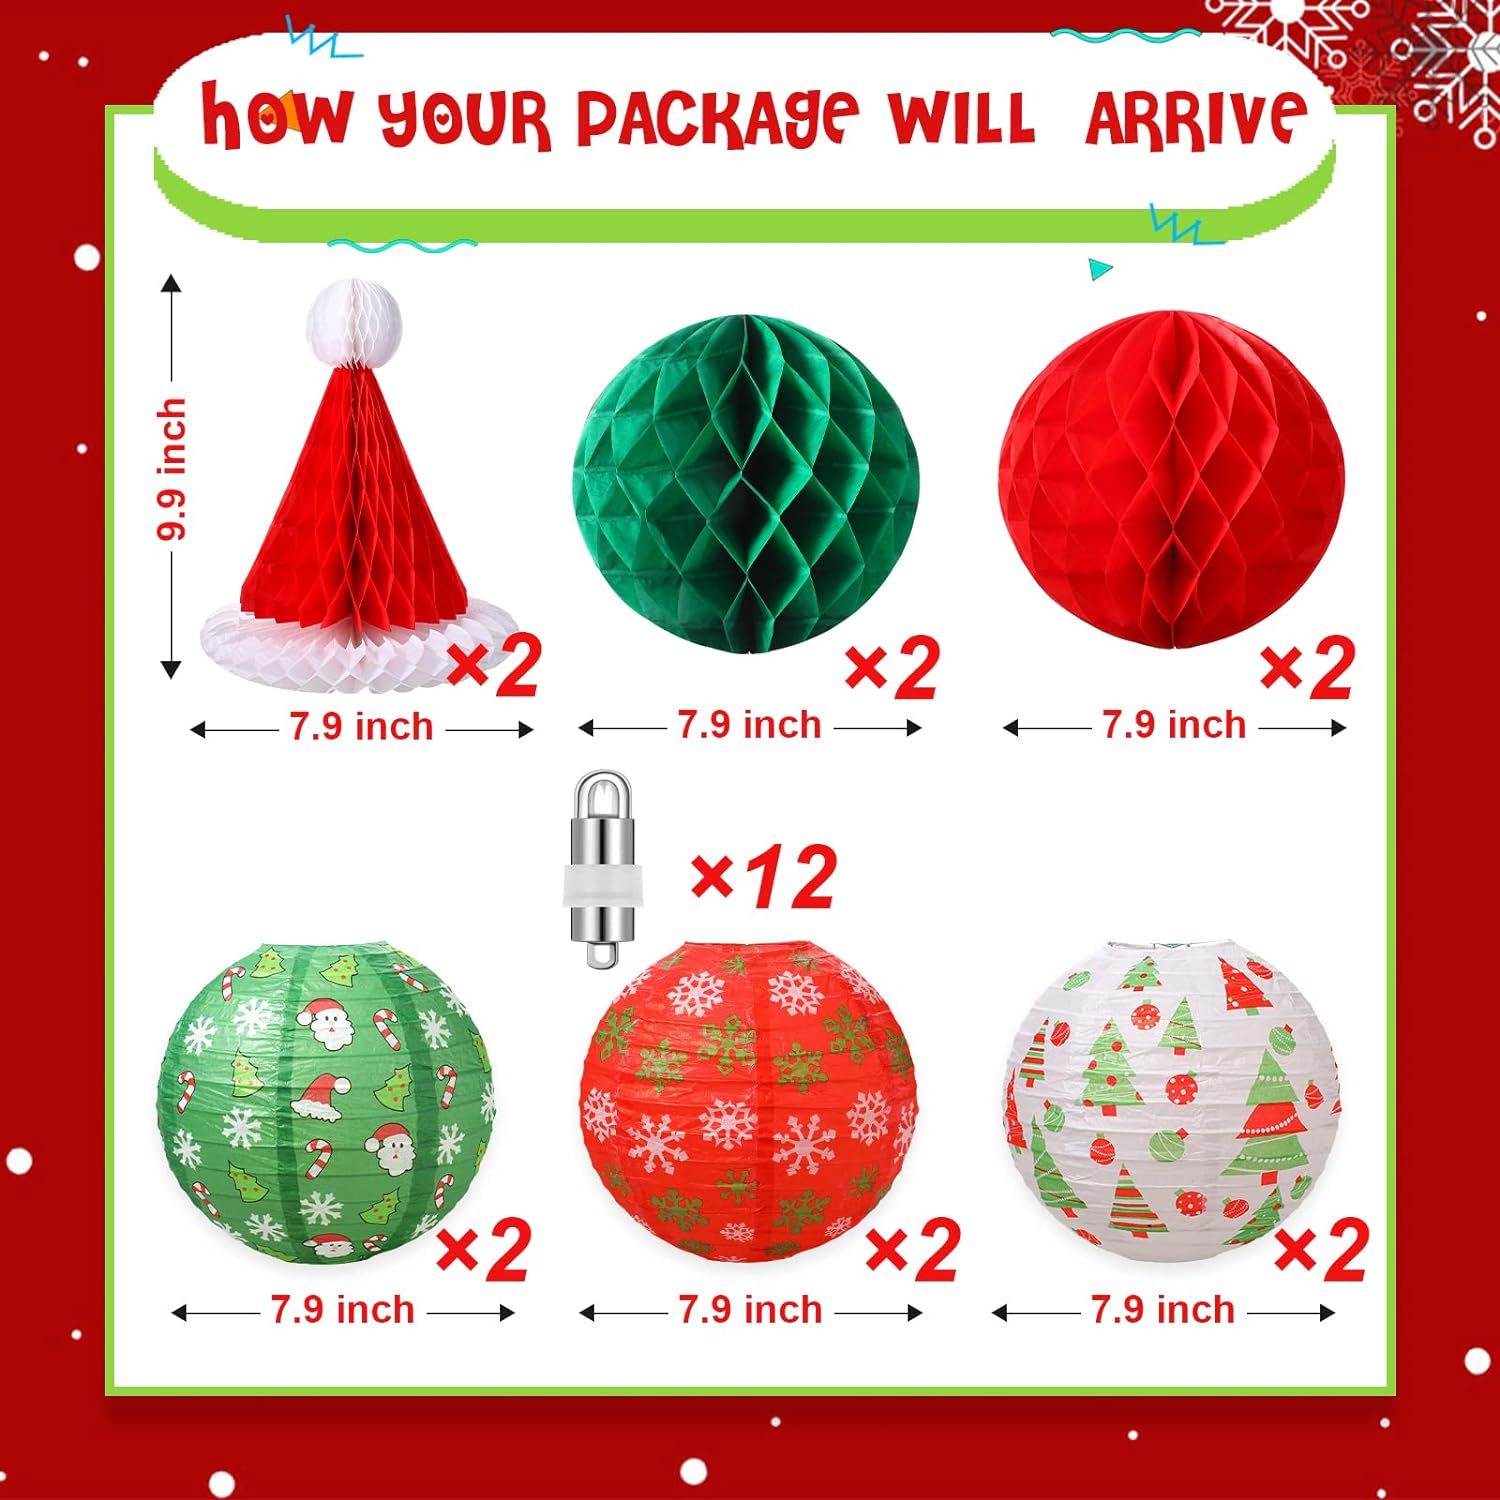 Mudder 12 Pieces Christmas Party Paper Lanterns with 12 LED Paper Lantern Light, Red Green White Paper Lanterns Honeycomb Balls Honeyc